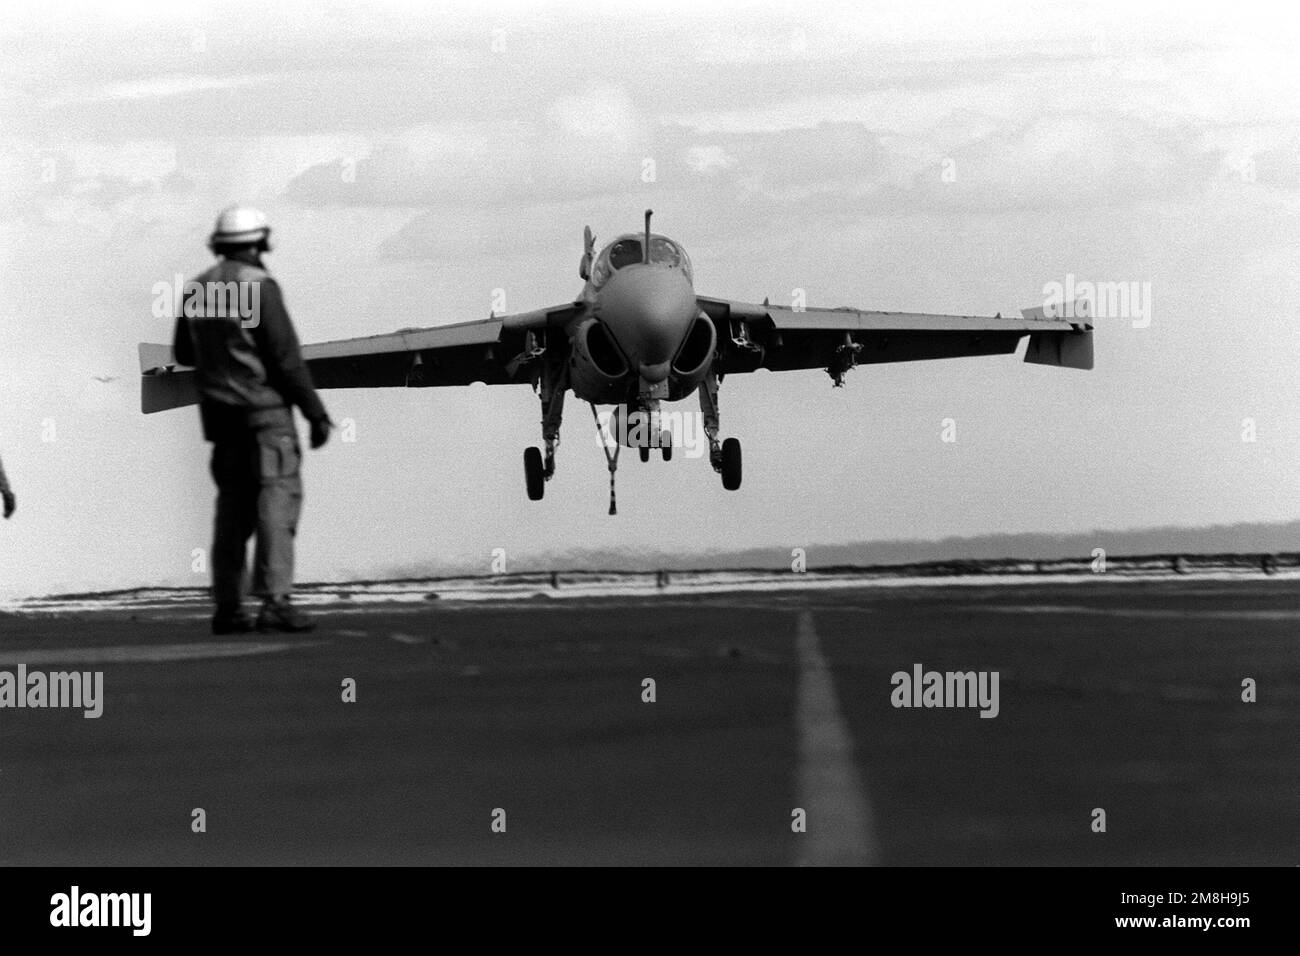 A flight deck crewman watches as an Attack Squadron 75 (VA-75) A-6E Intruder aircraft lands on the aircraft carrier USS JOHN F. KENNEDY (CV-67). Country: Adriatic Sea Stock Photo